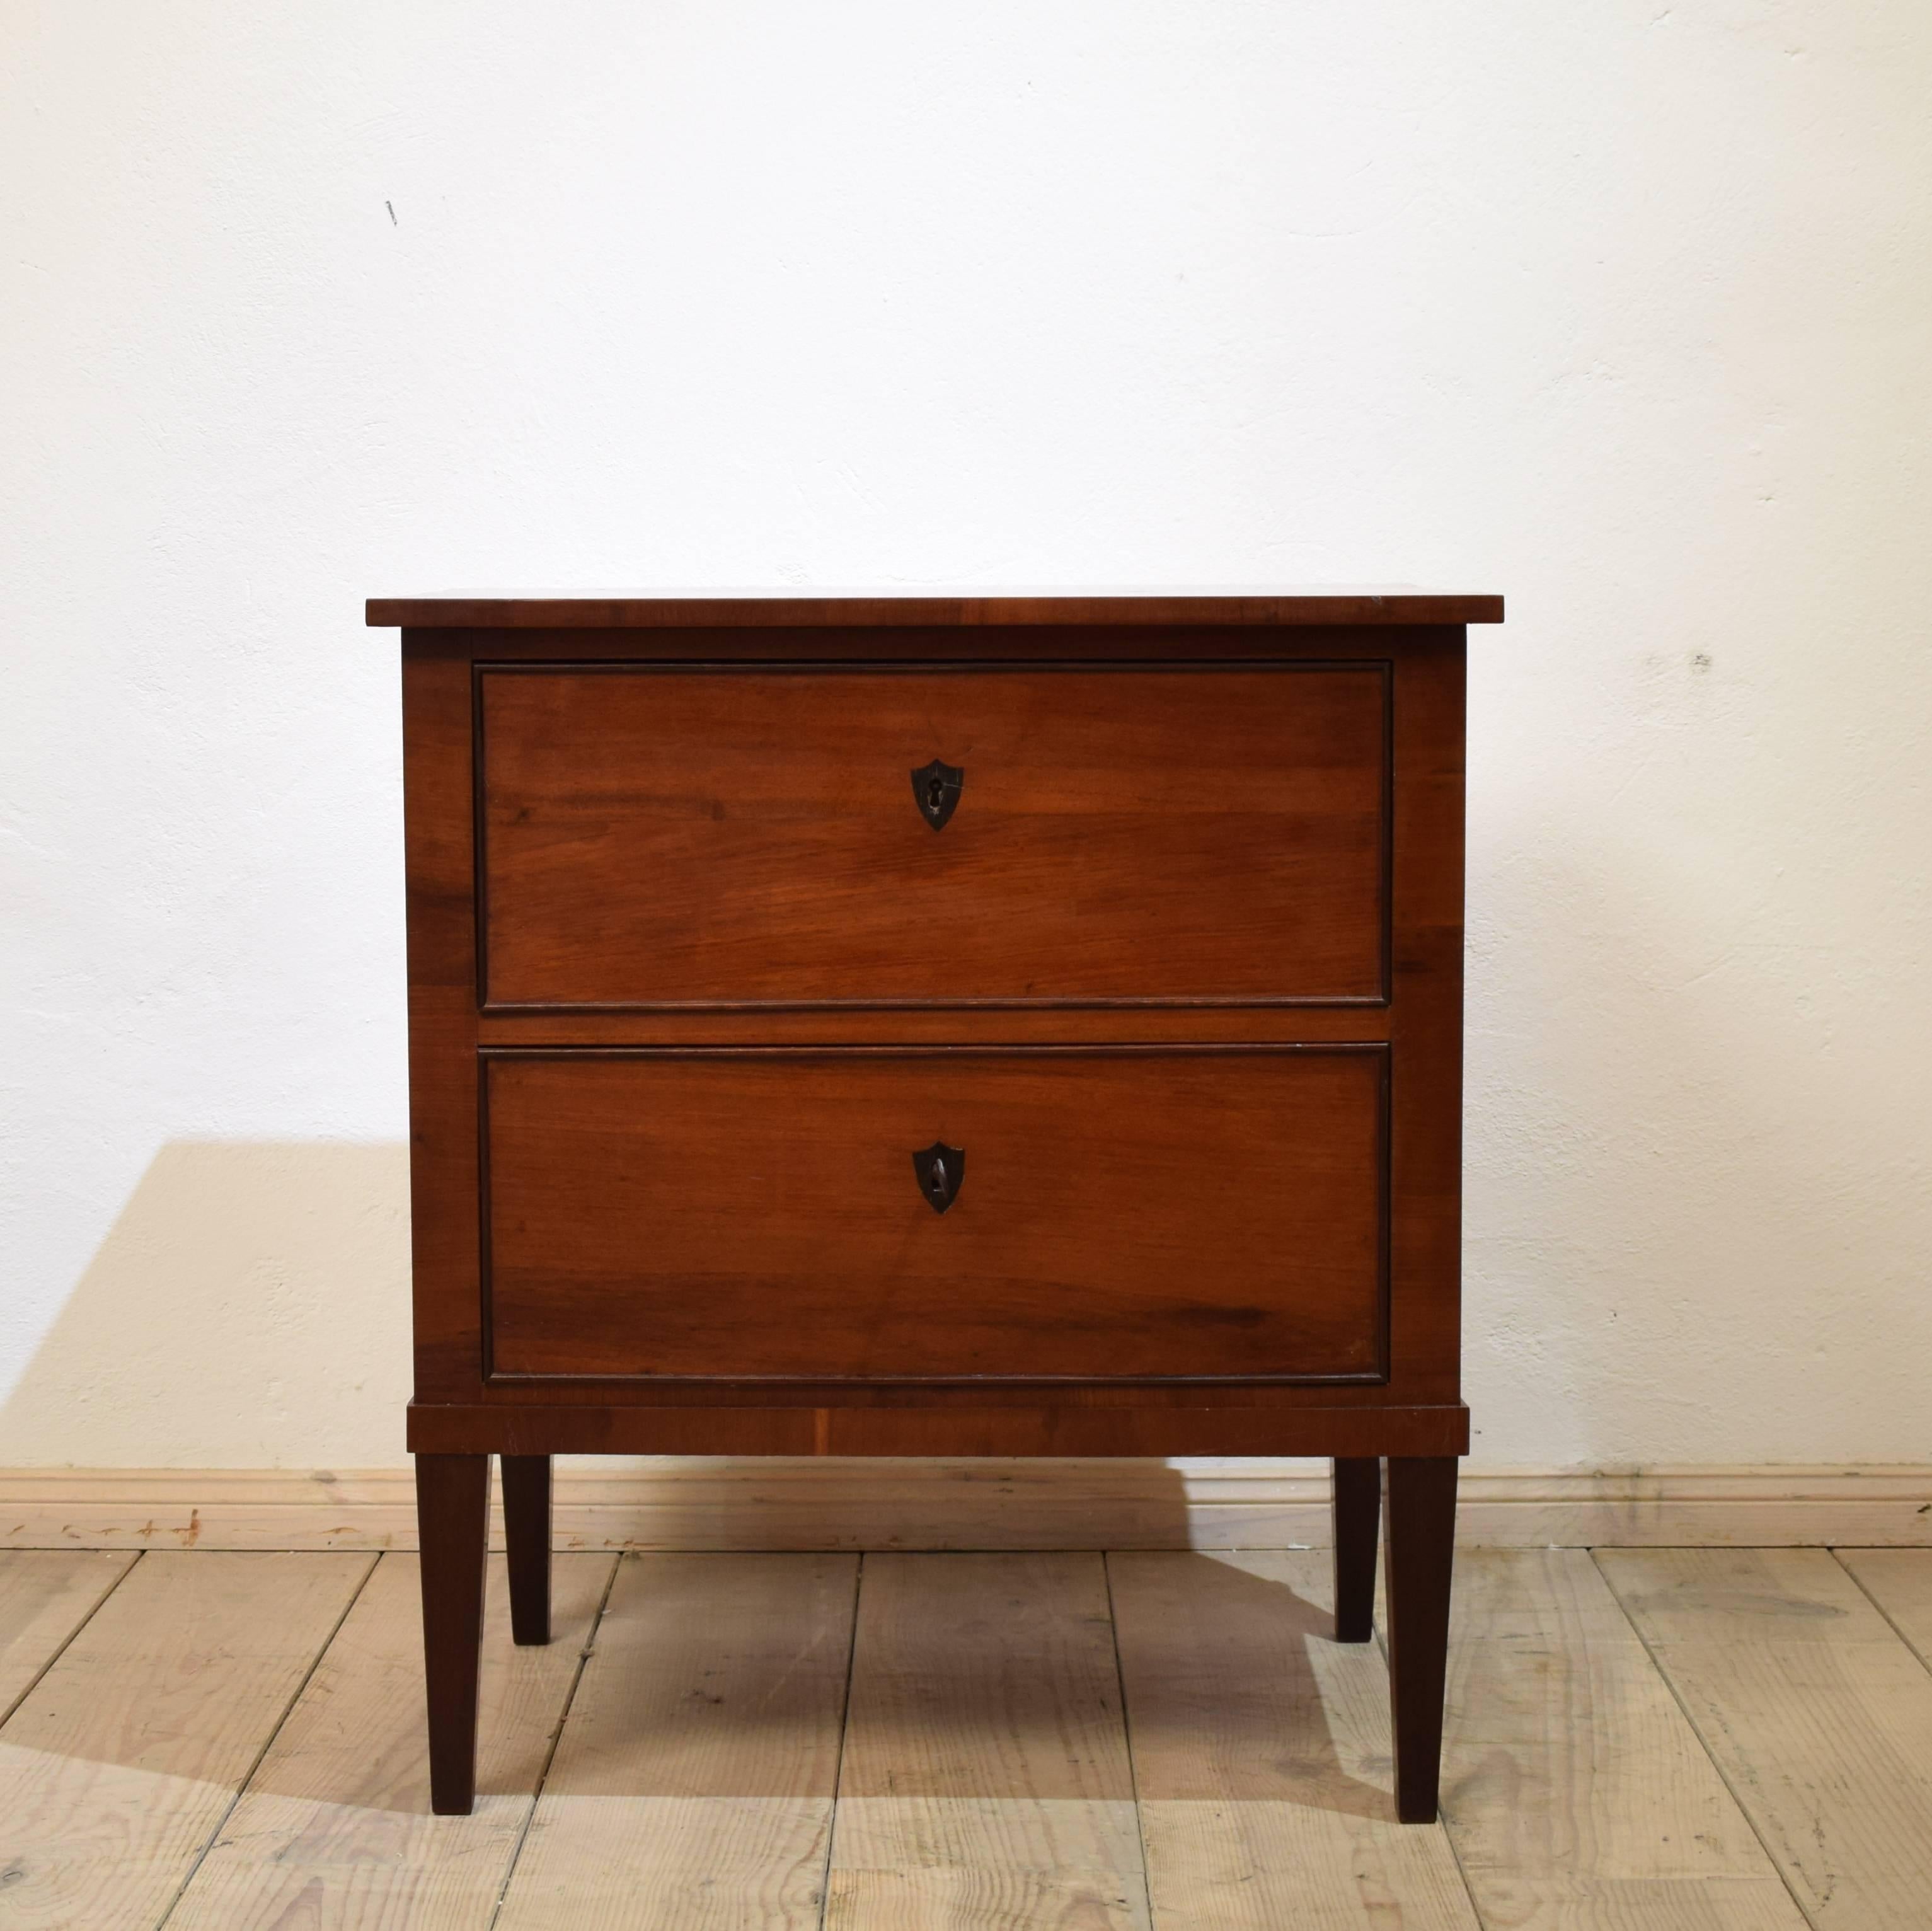 This small Biedermeier chest of drawers from circa 1820 comes from North Germany and is veneered in mahogany. It still has the original surface and a very nice Patina.